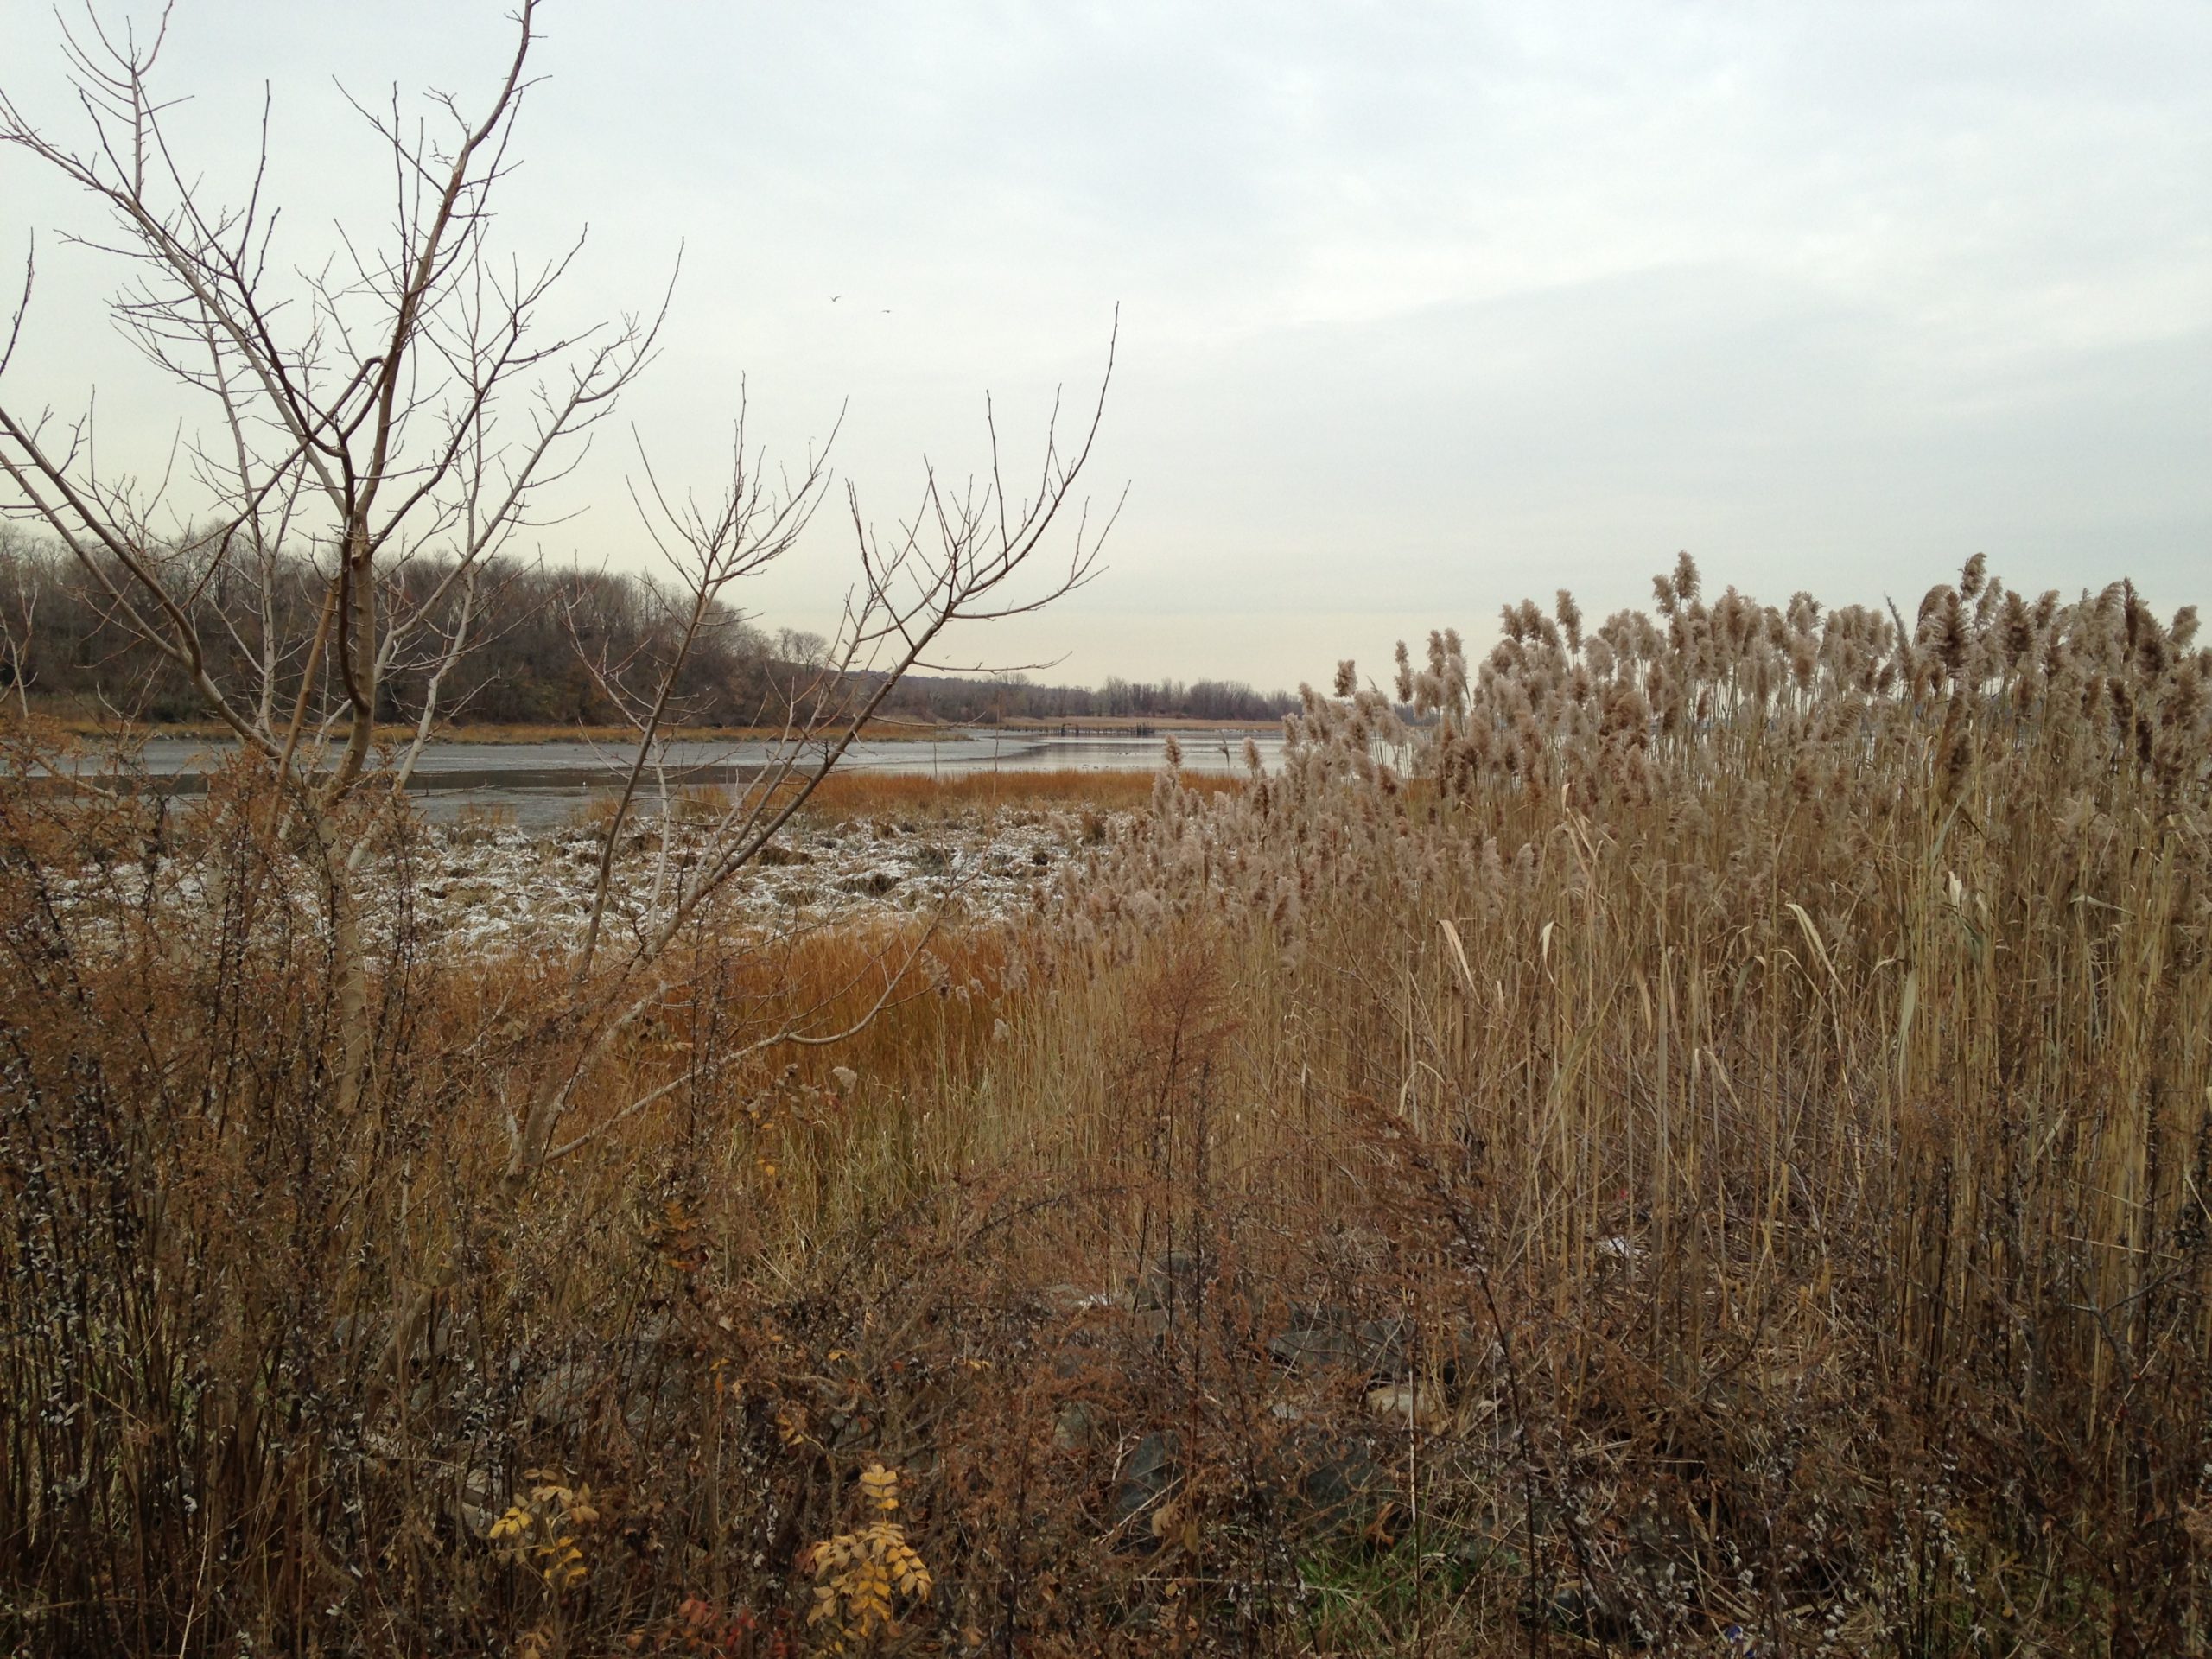 A view across a frozen bay on the North Shore of Long Island in late November, with tall reeds and a bare tree in the foreground, and frost on the ground, and a dark headland in the distance beyond the cold grey water.